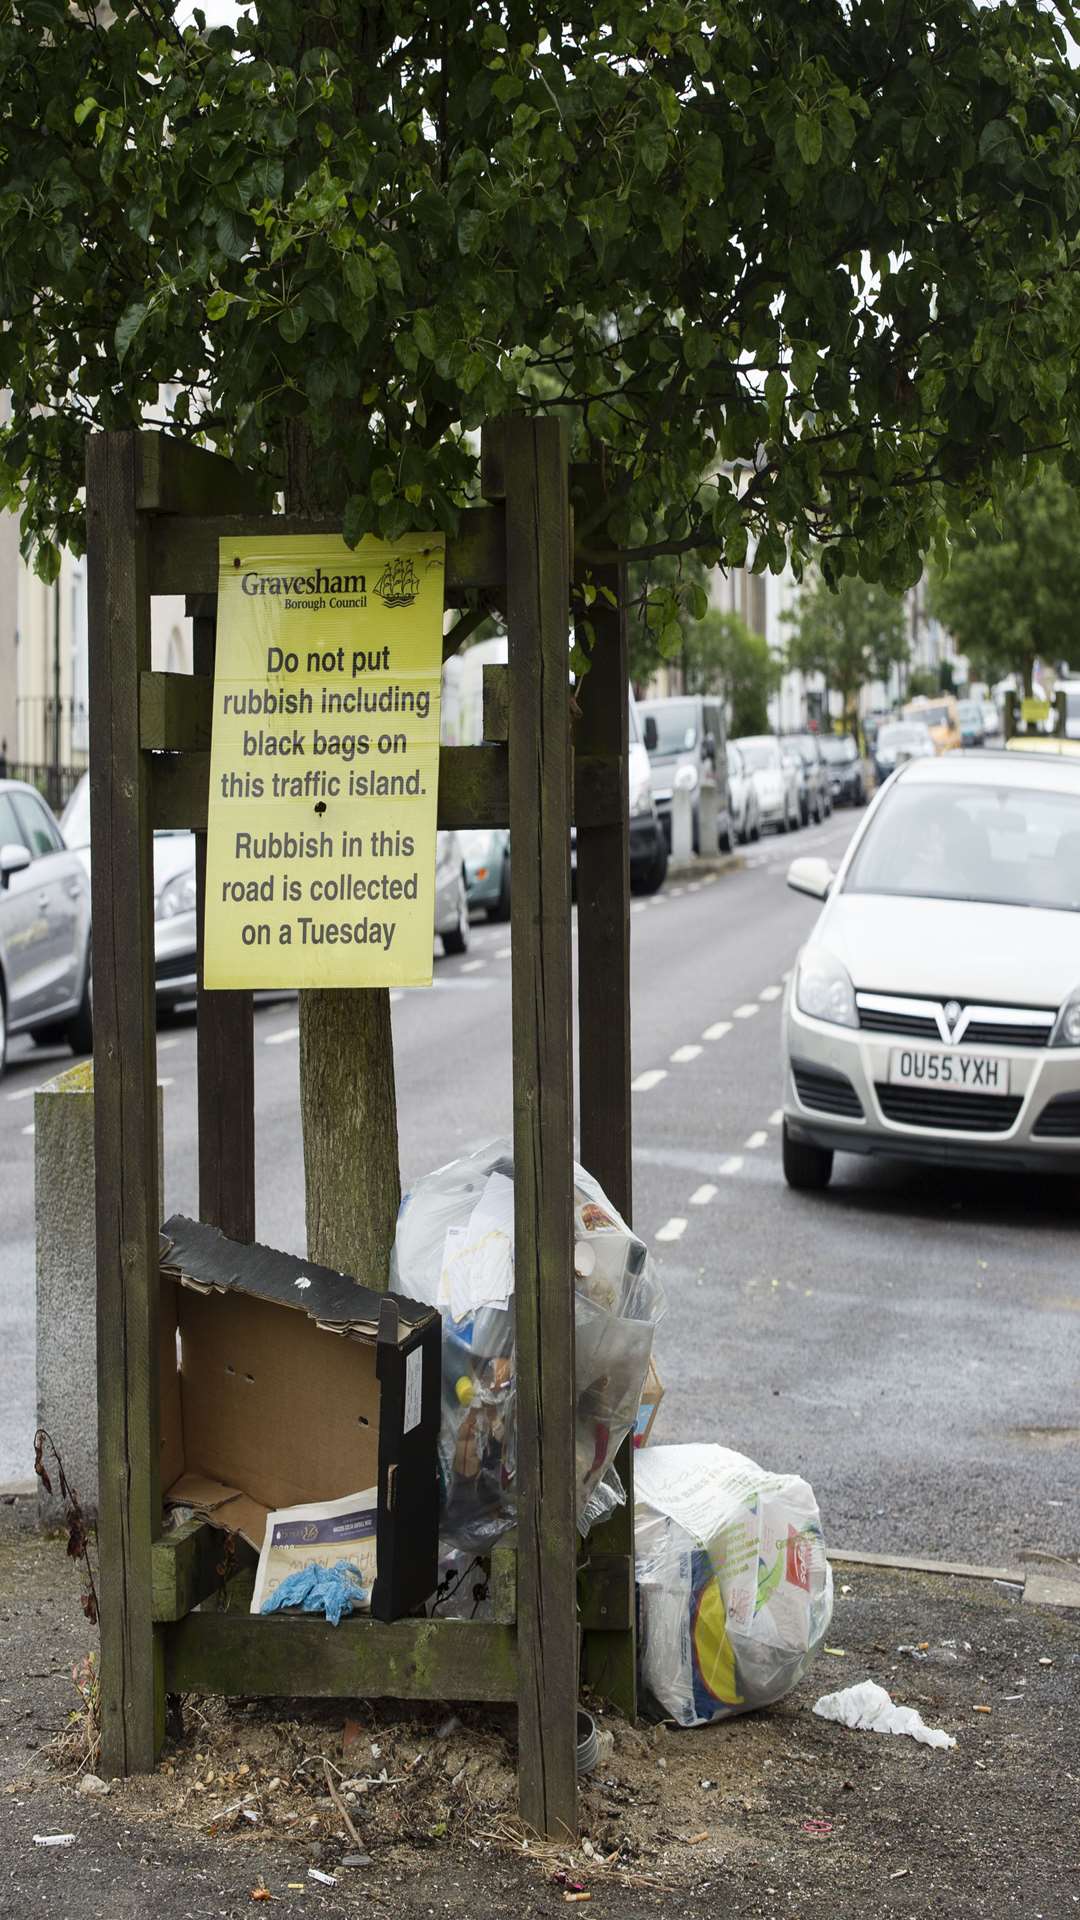 Wellington Street, Gravesend, is a hot-spot for rubbish